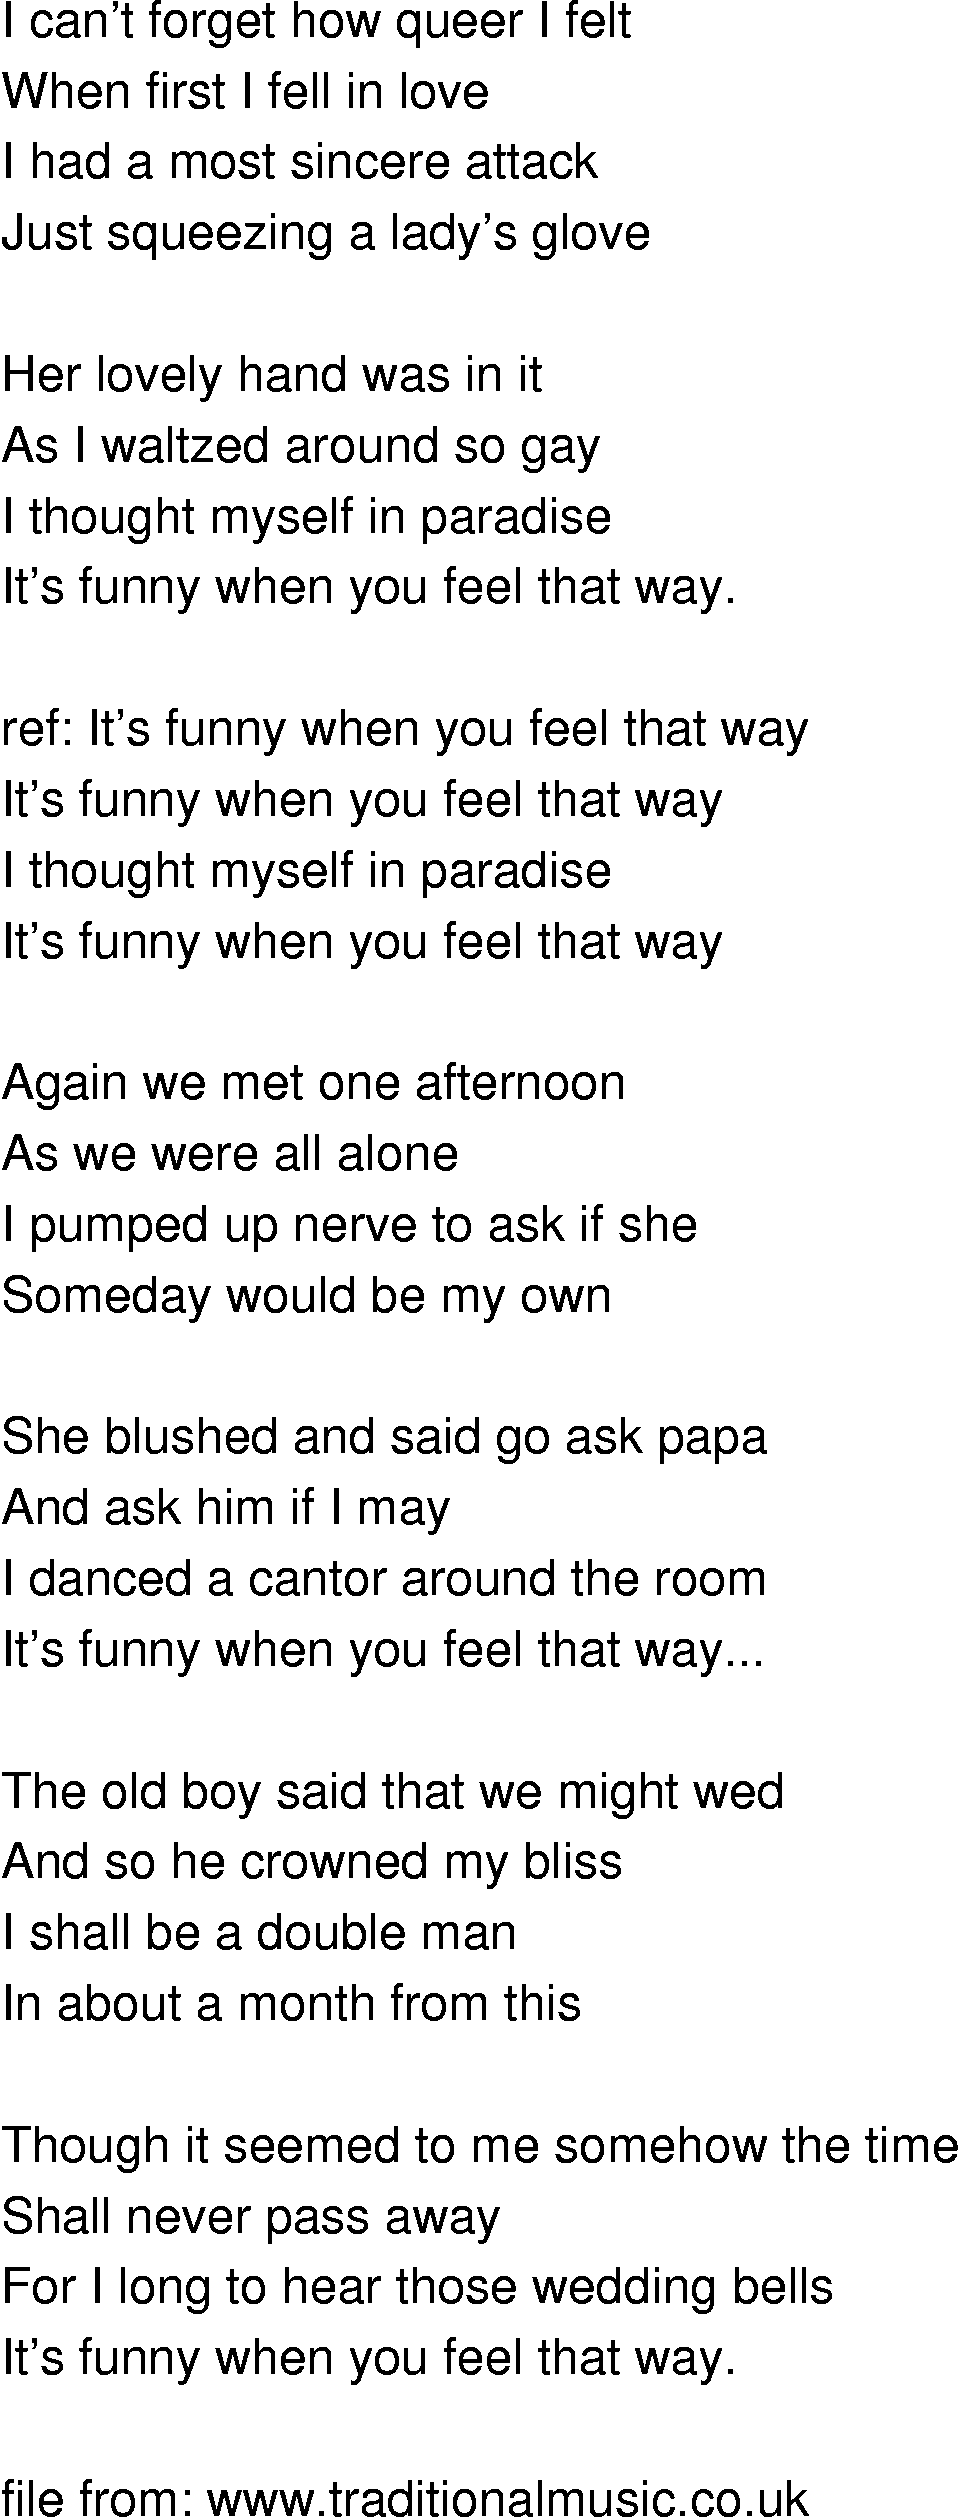 Old-Time Song Lyrics - Funny When You Feel That Way